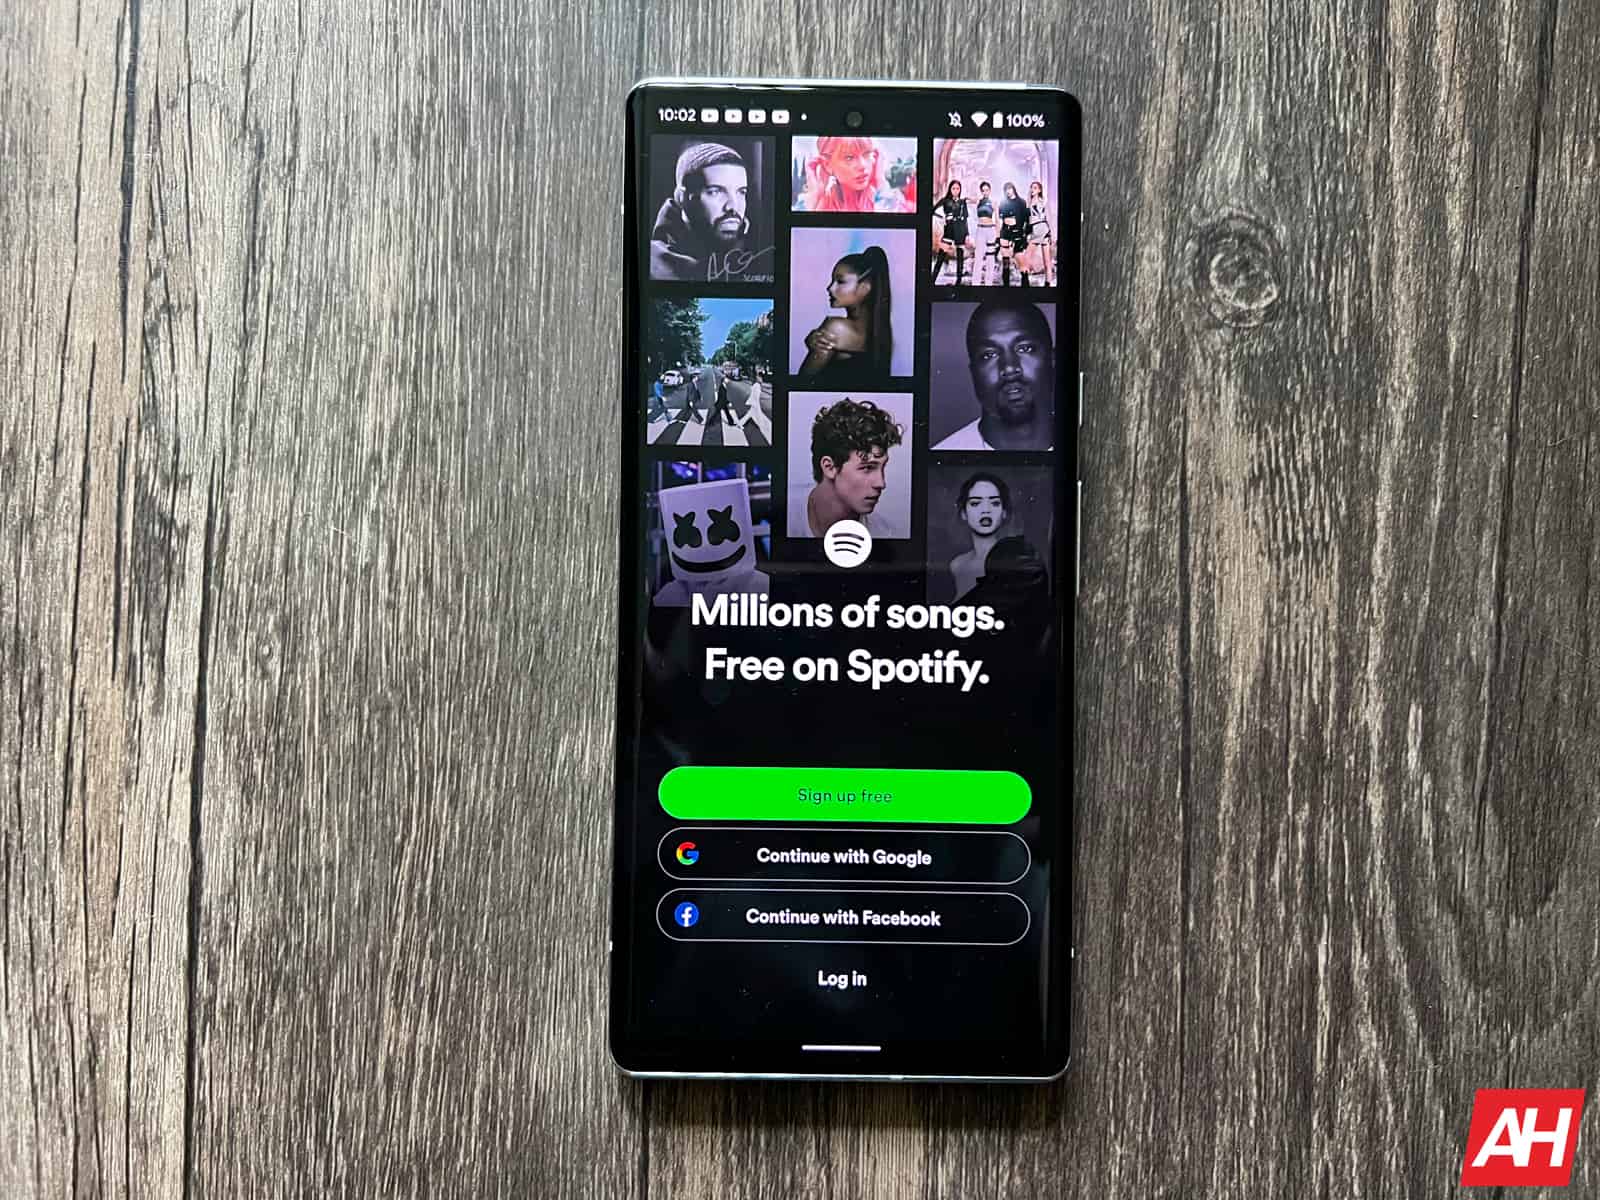 Spotify's EU price update could overhaul Apple's App Store rules